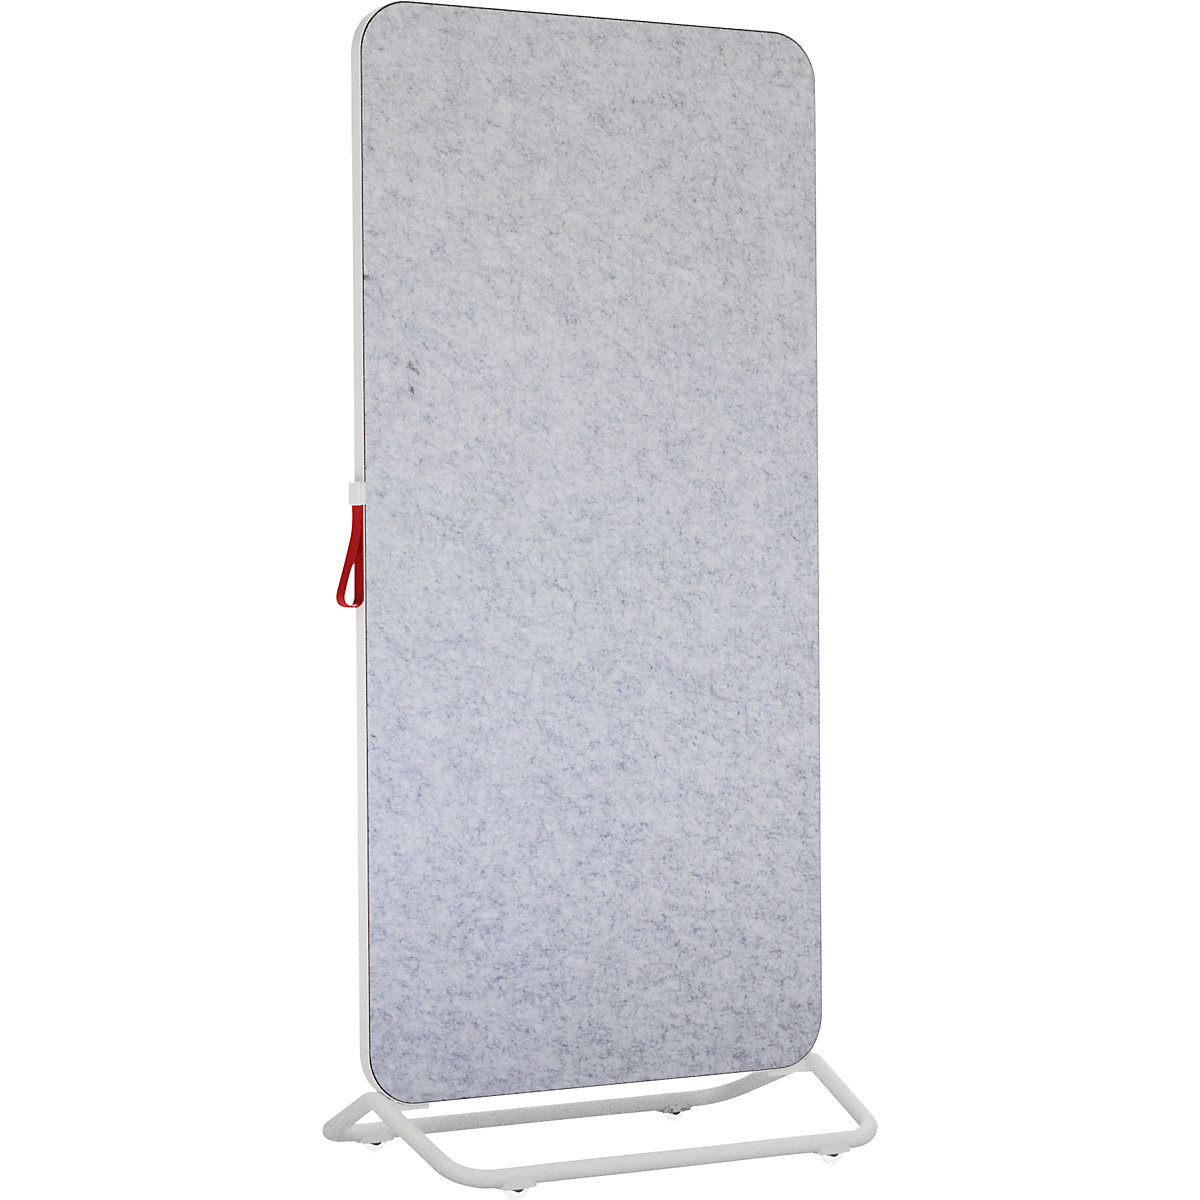 Mobile writing board, pin board and acoustic board - Chameleon